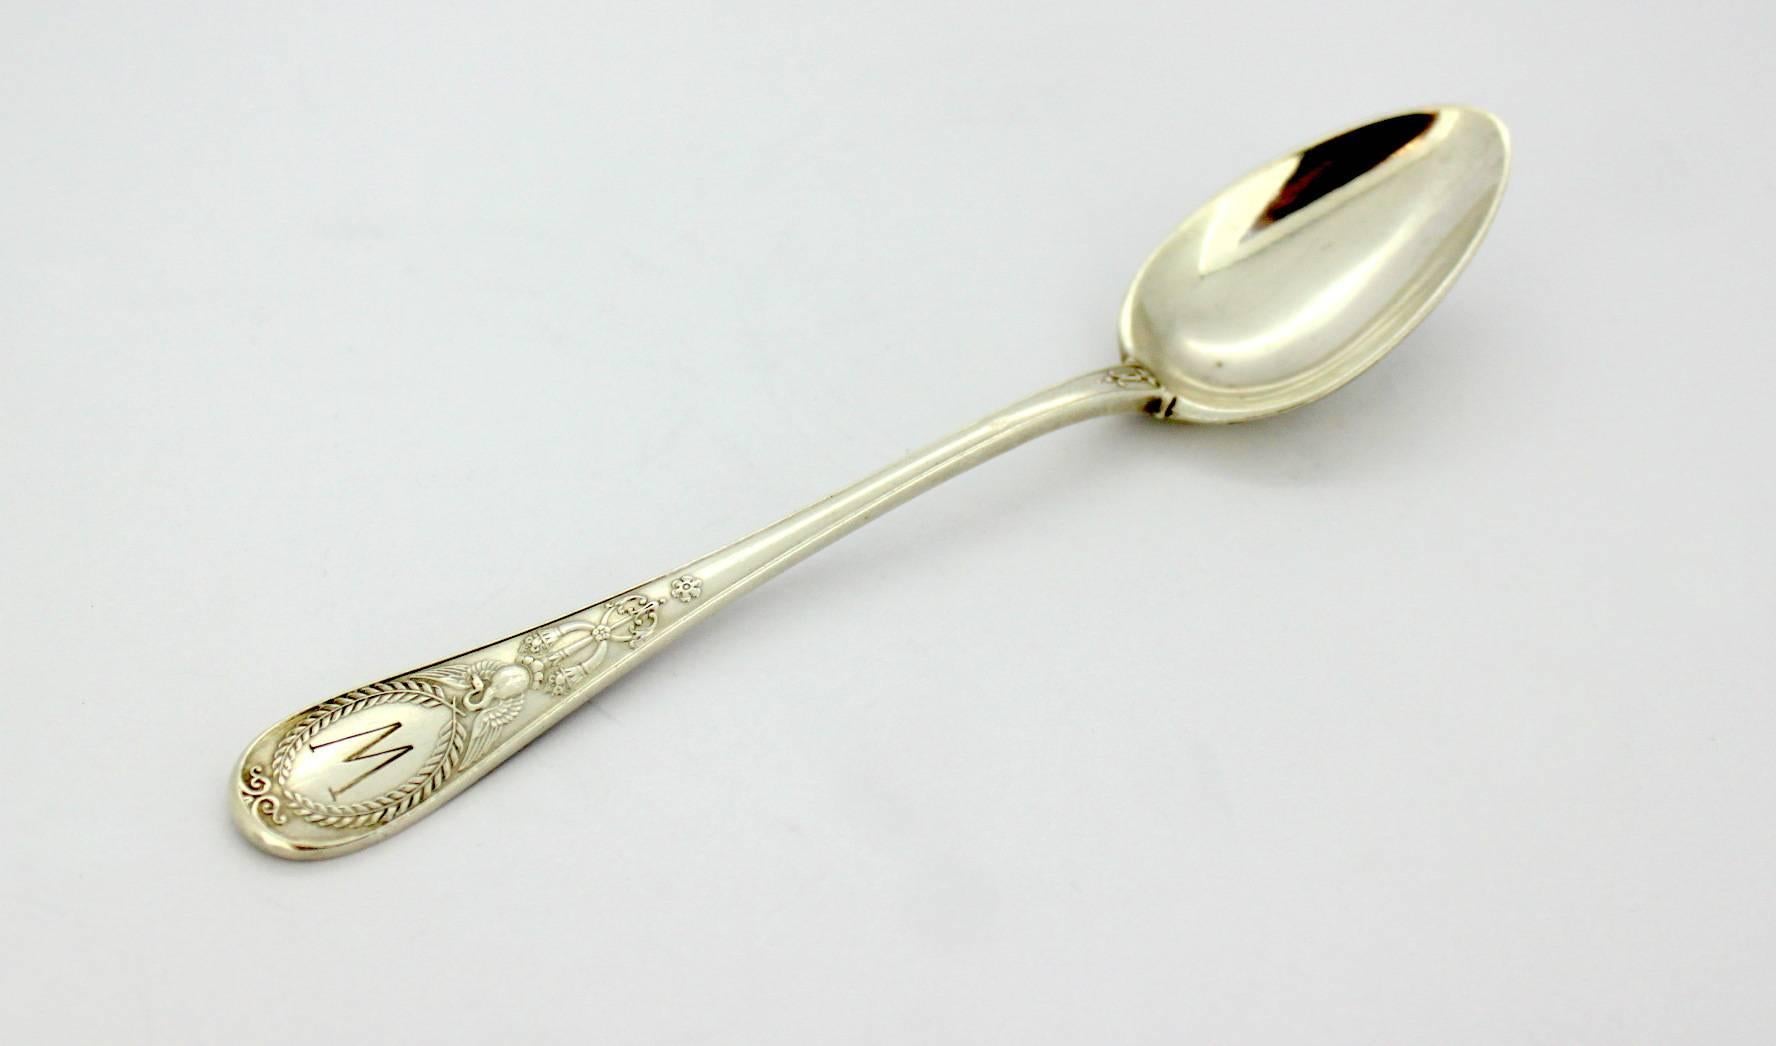 Antique solid silver coffee spoon, Has Initial 